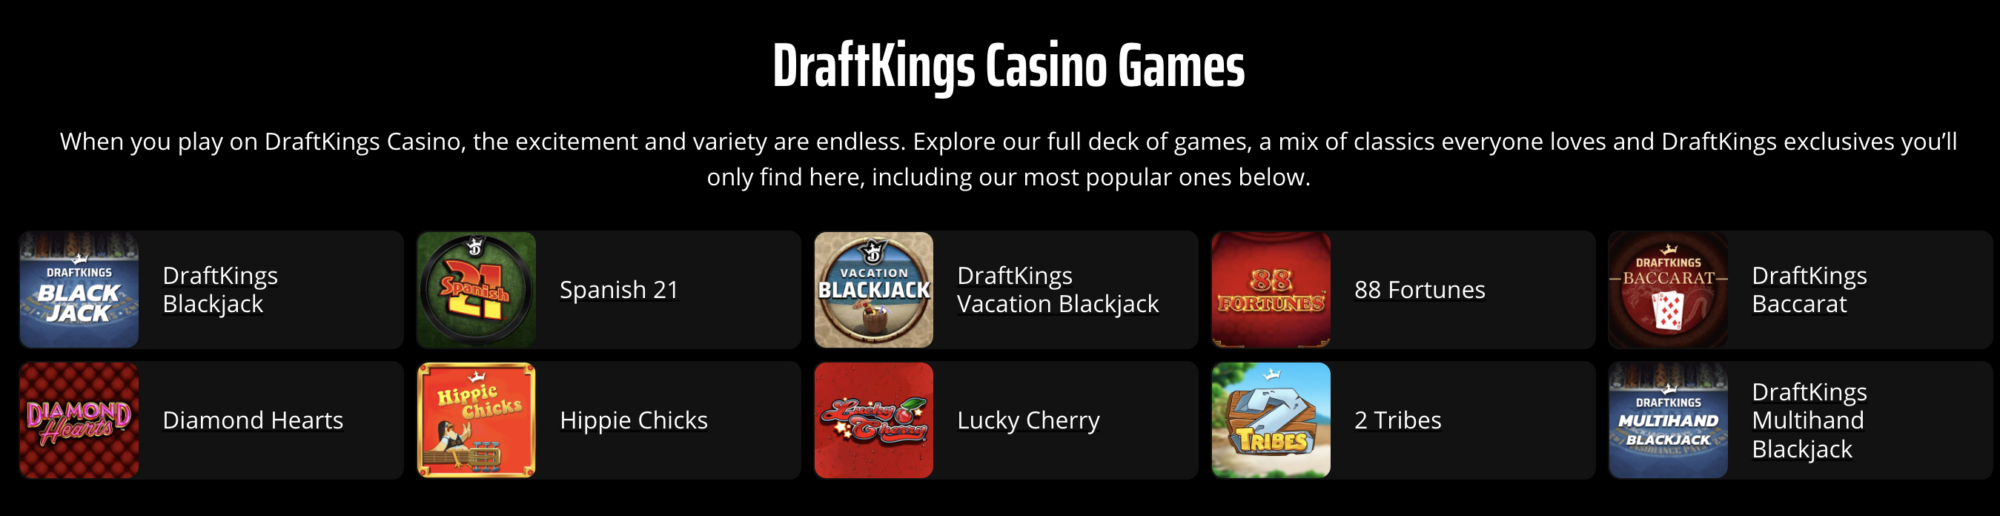 DraftKings Casino Game Options